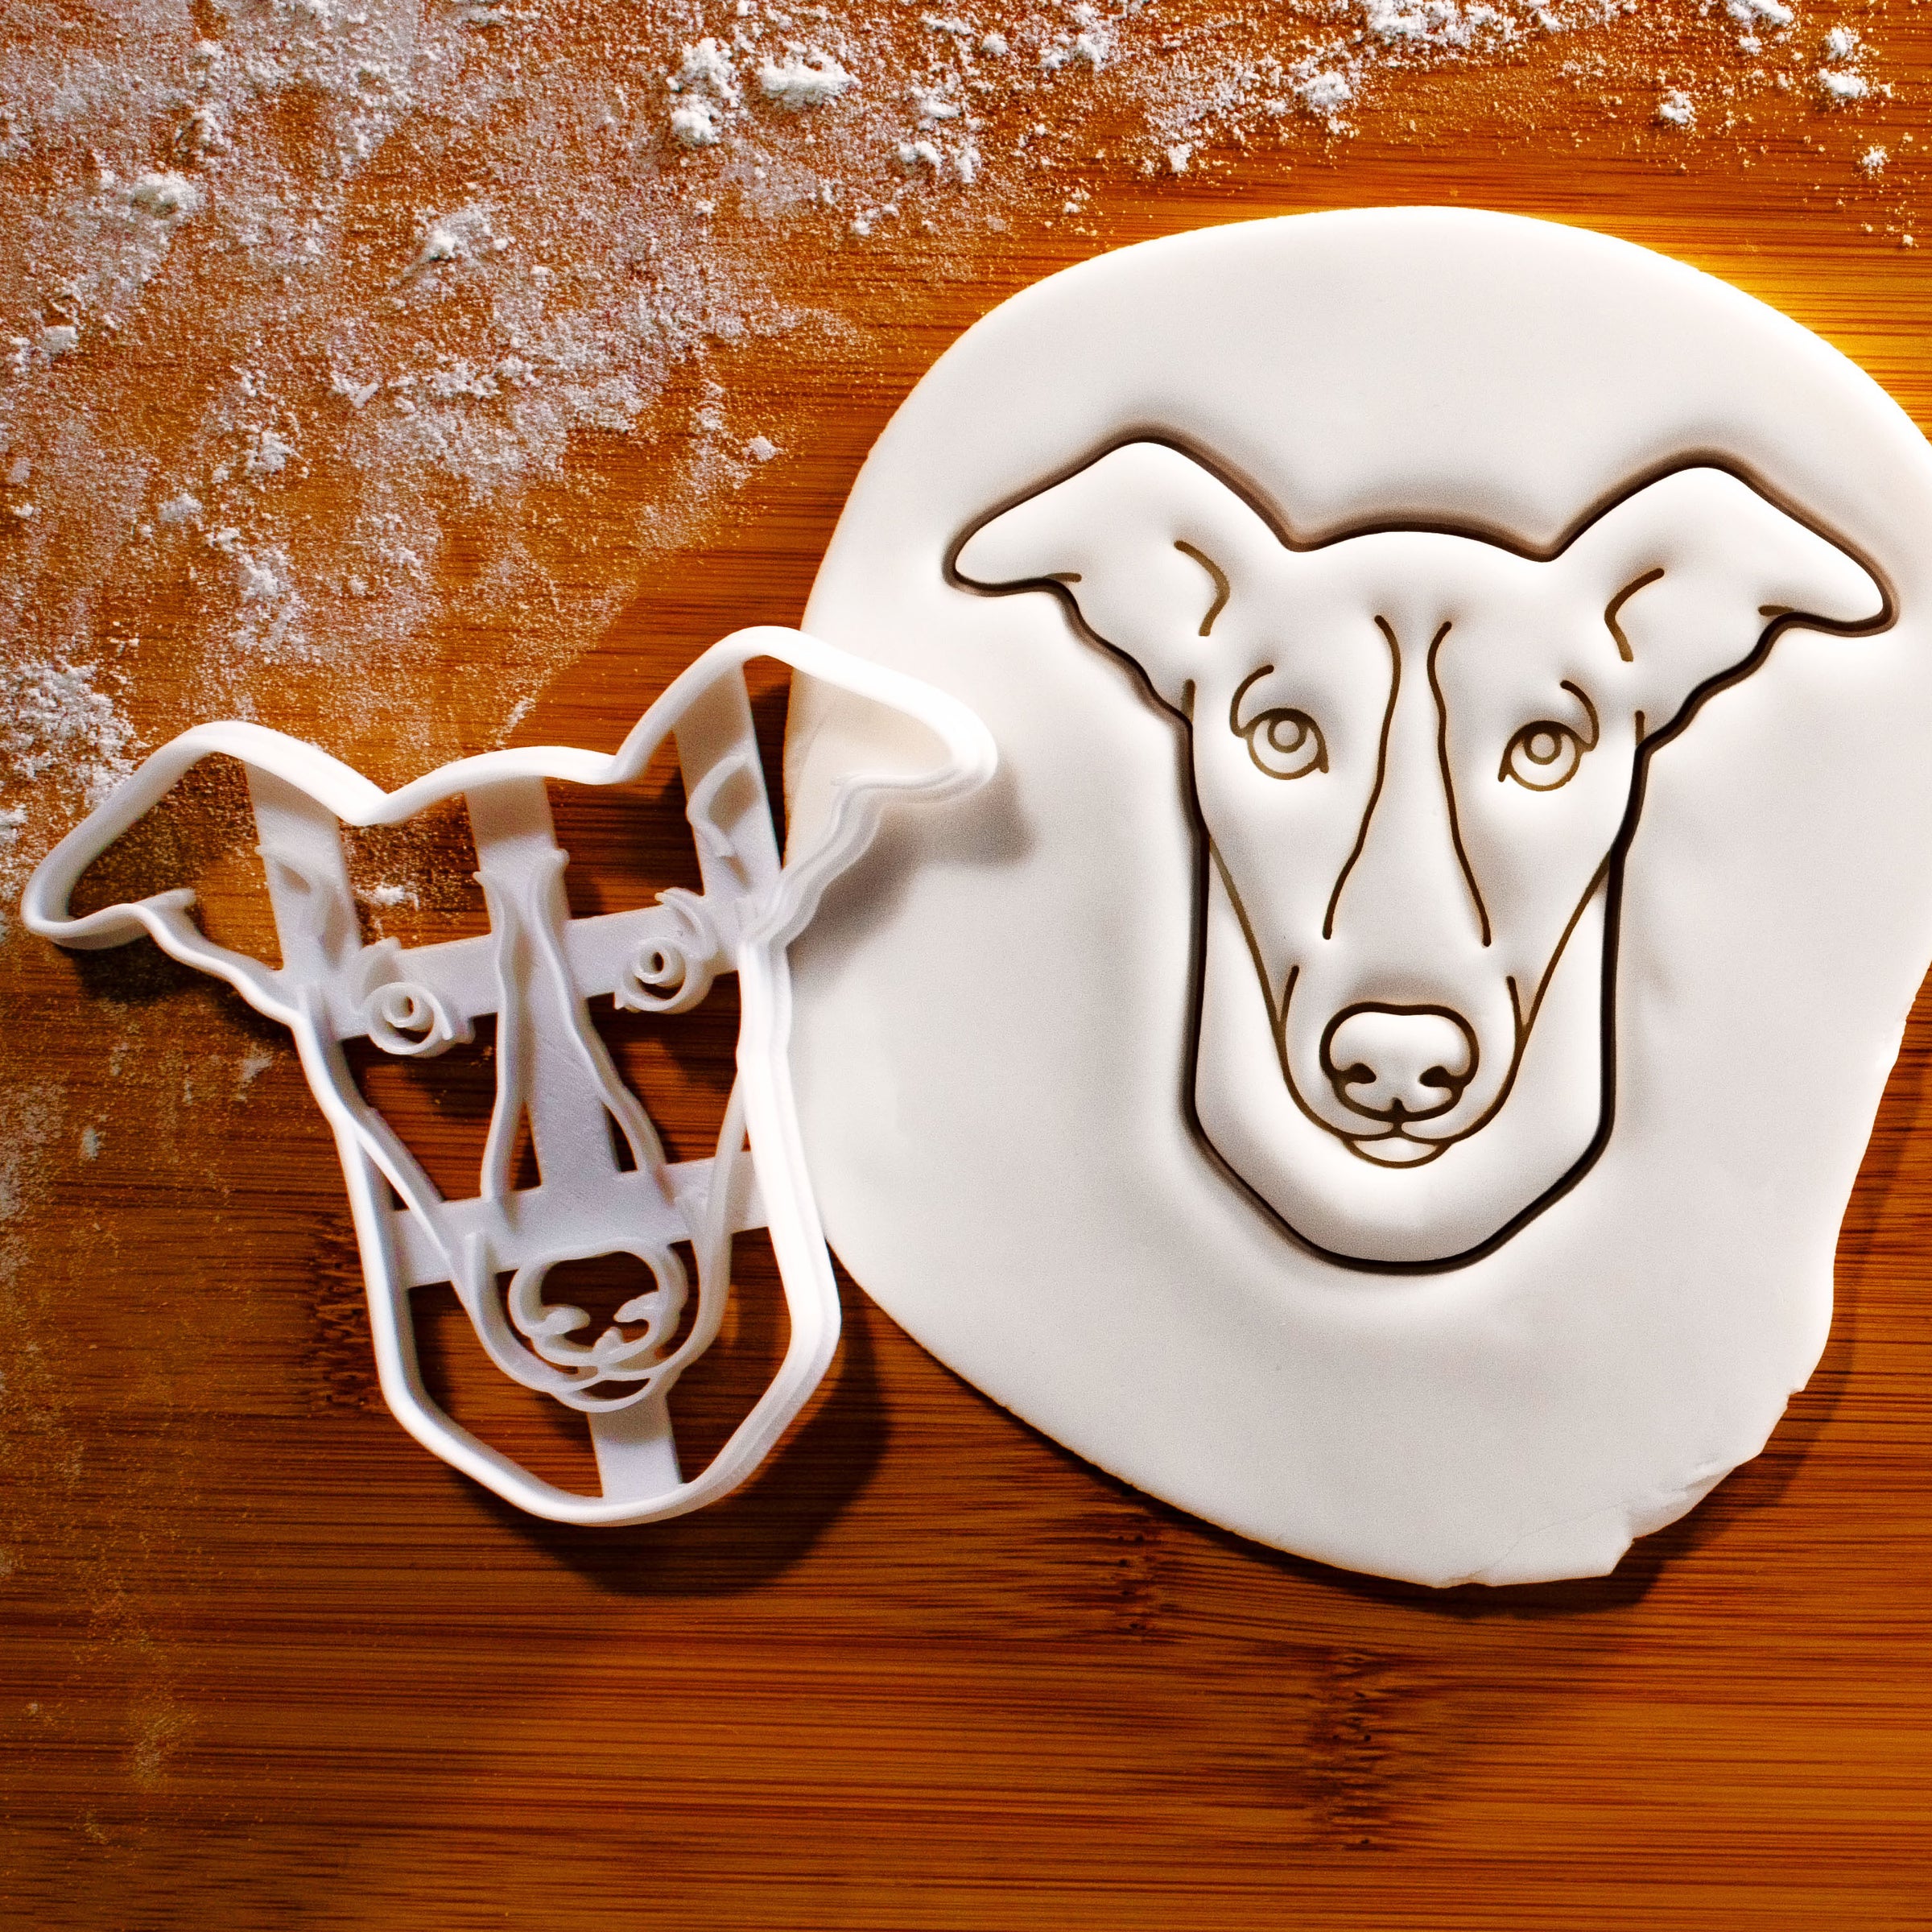 Whippet dog face cookie cutter pressed onto white fondant icing to show imprints - Bakerlogy